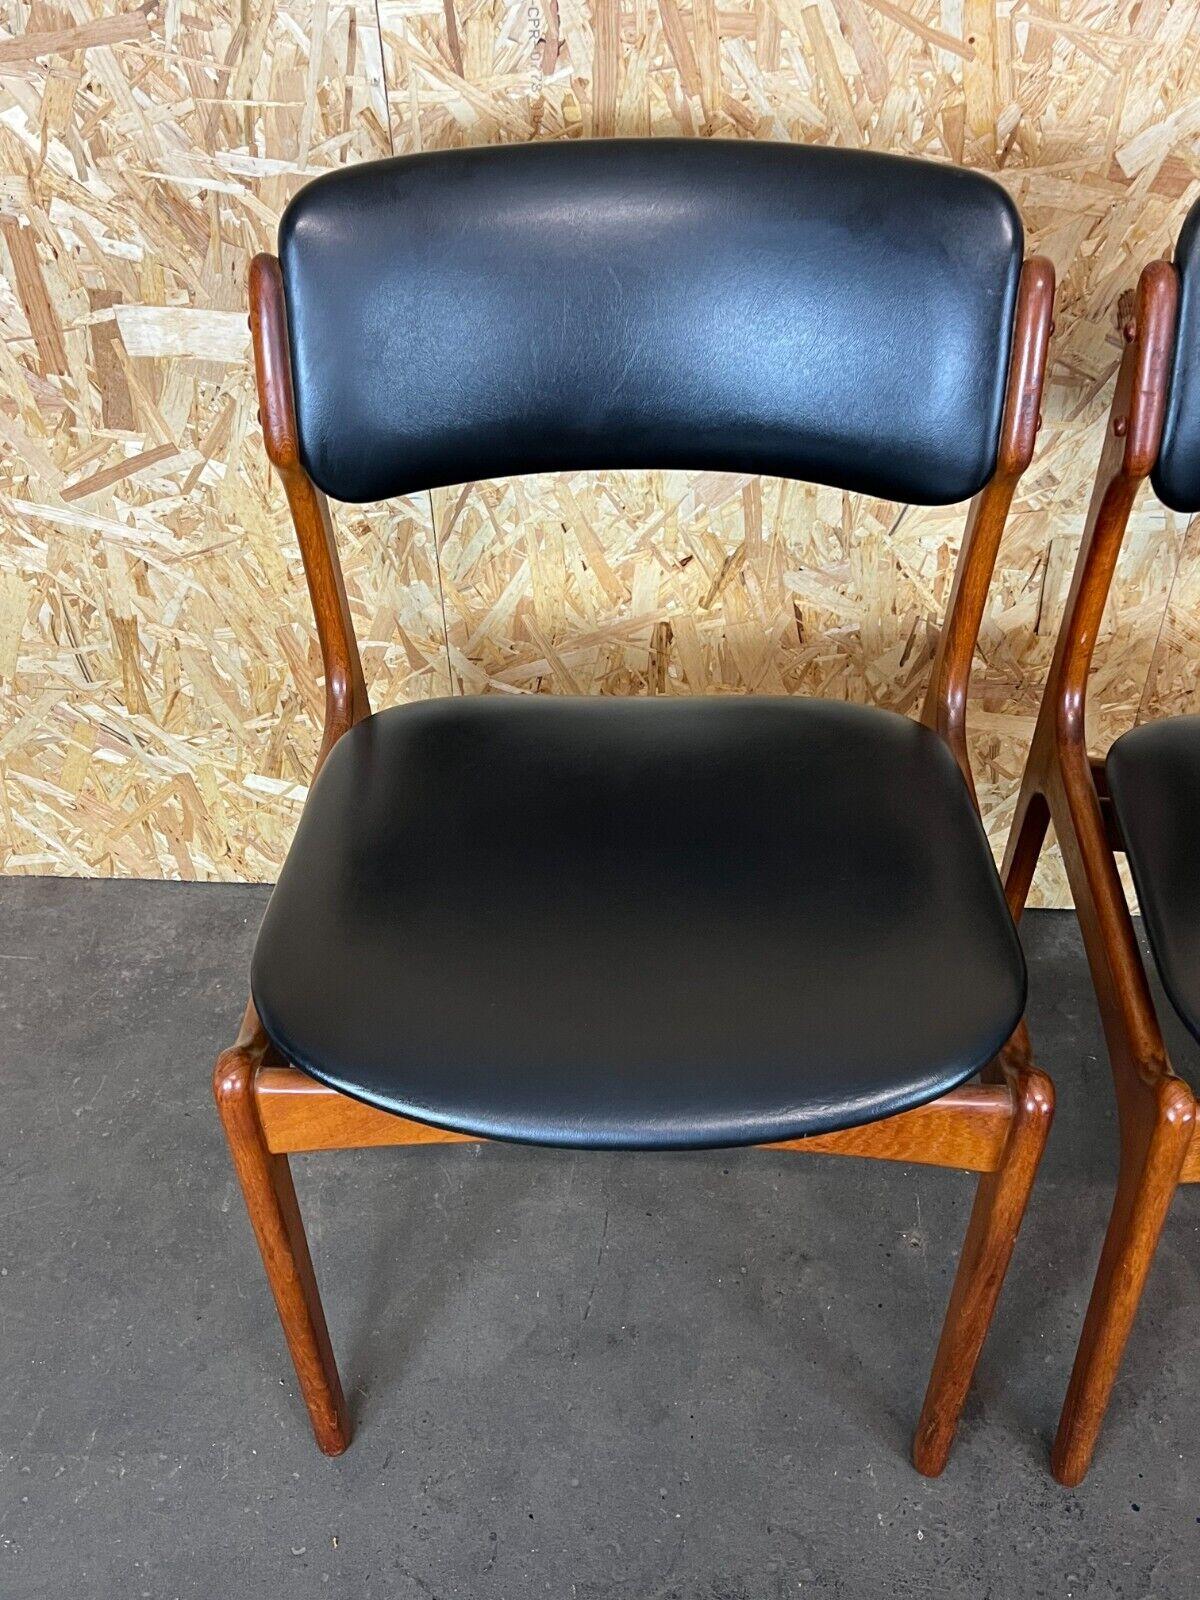 70's style dining chairs